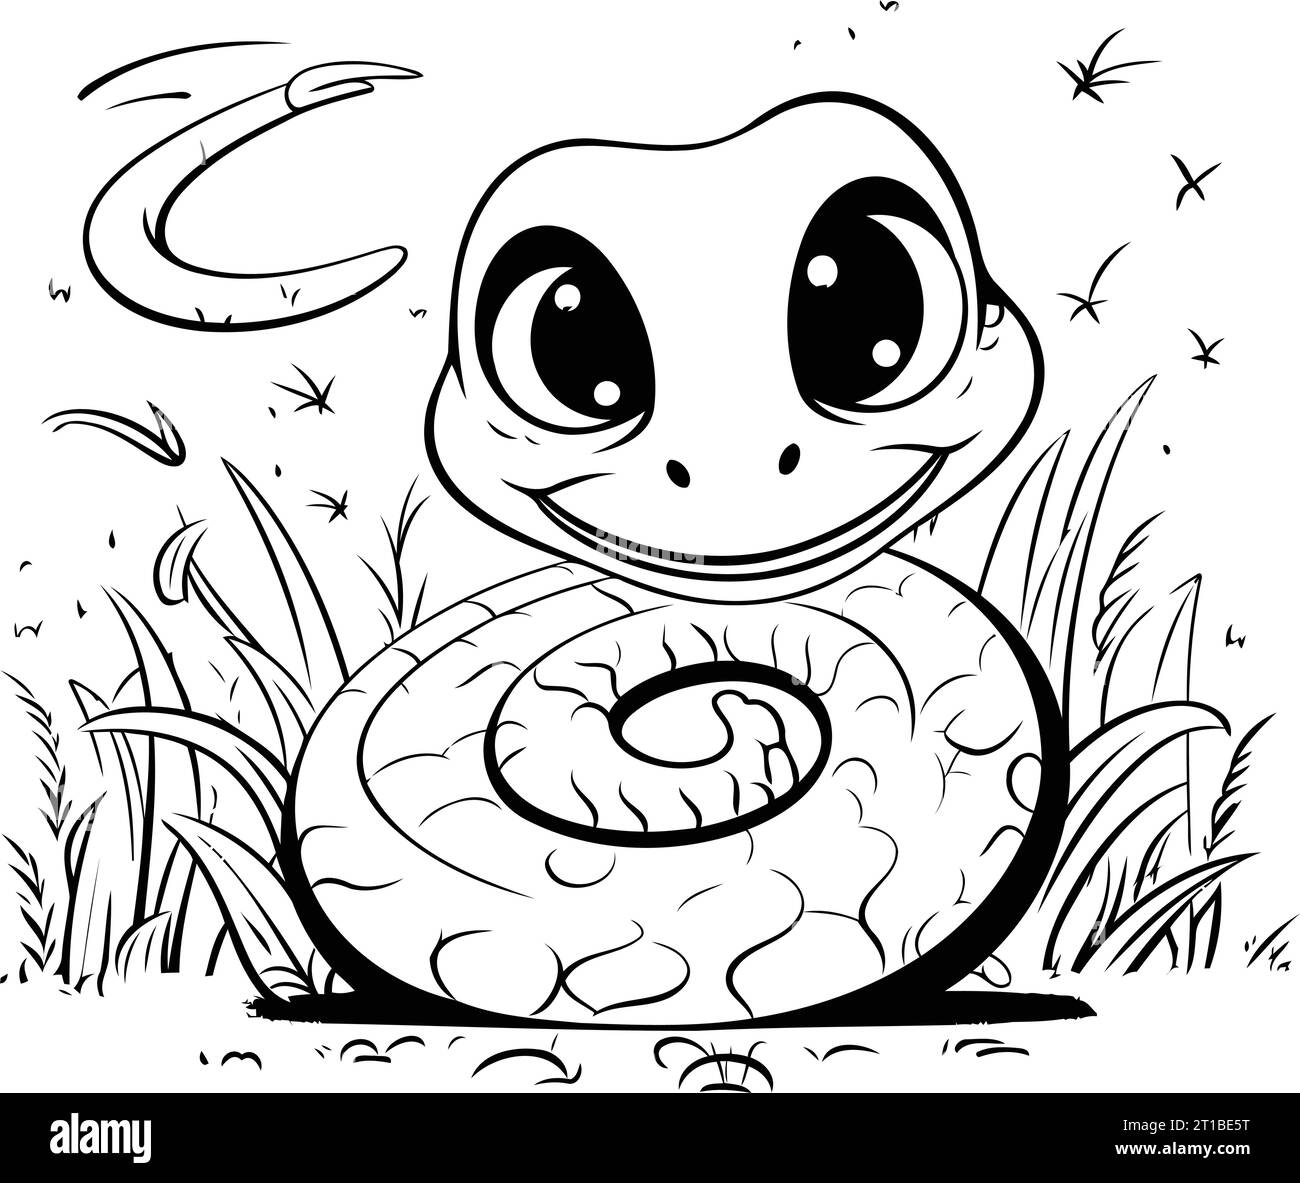 Cute cartoon frog in the grass. Black and white vector illustration. Stock Vector